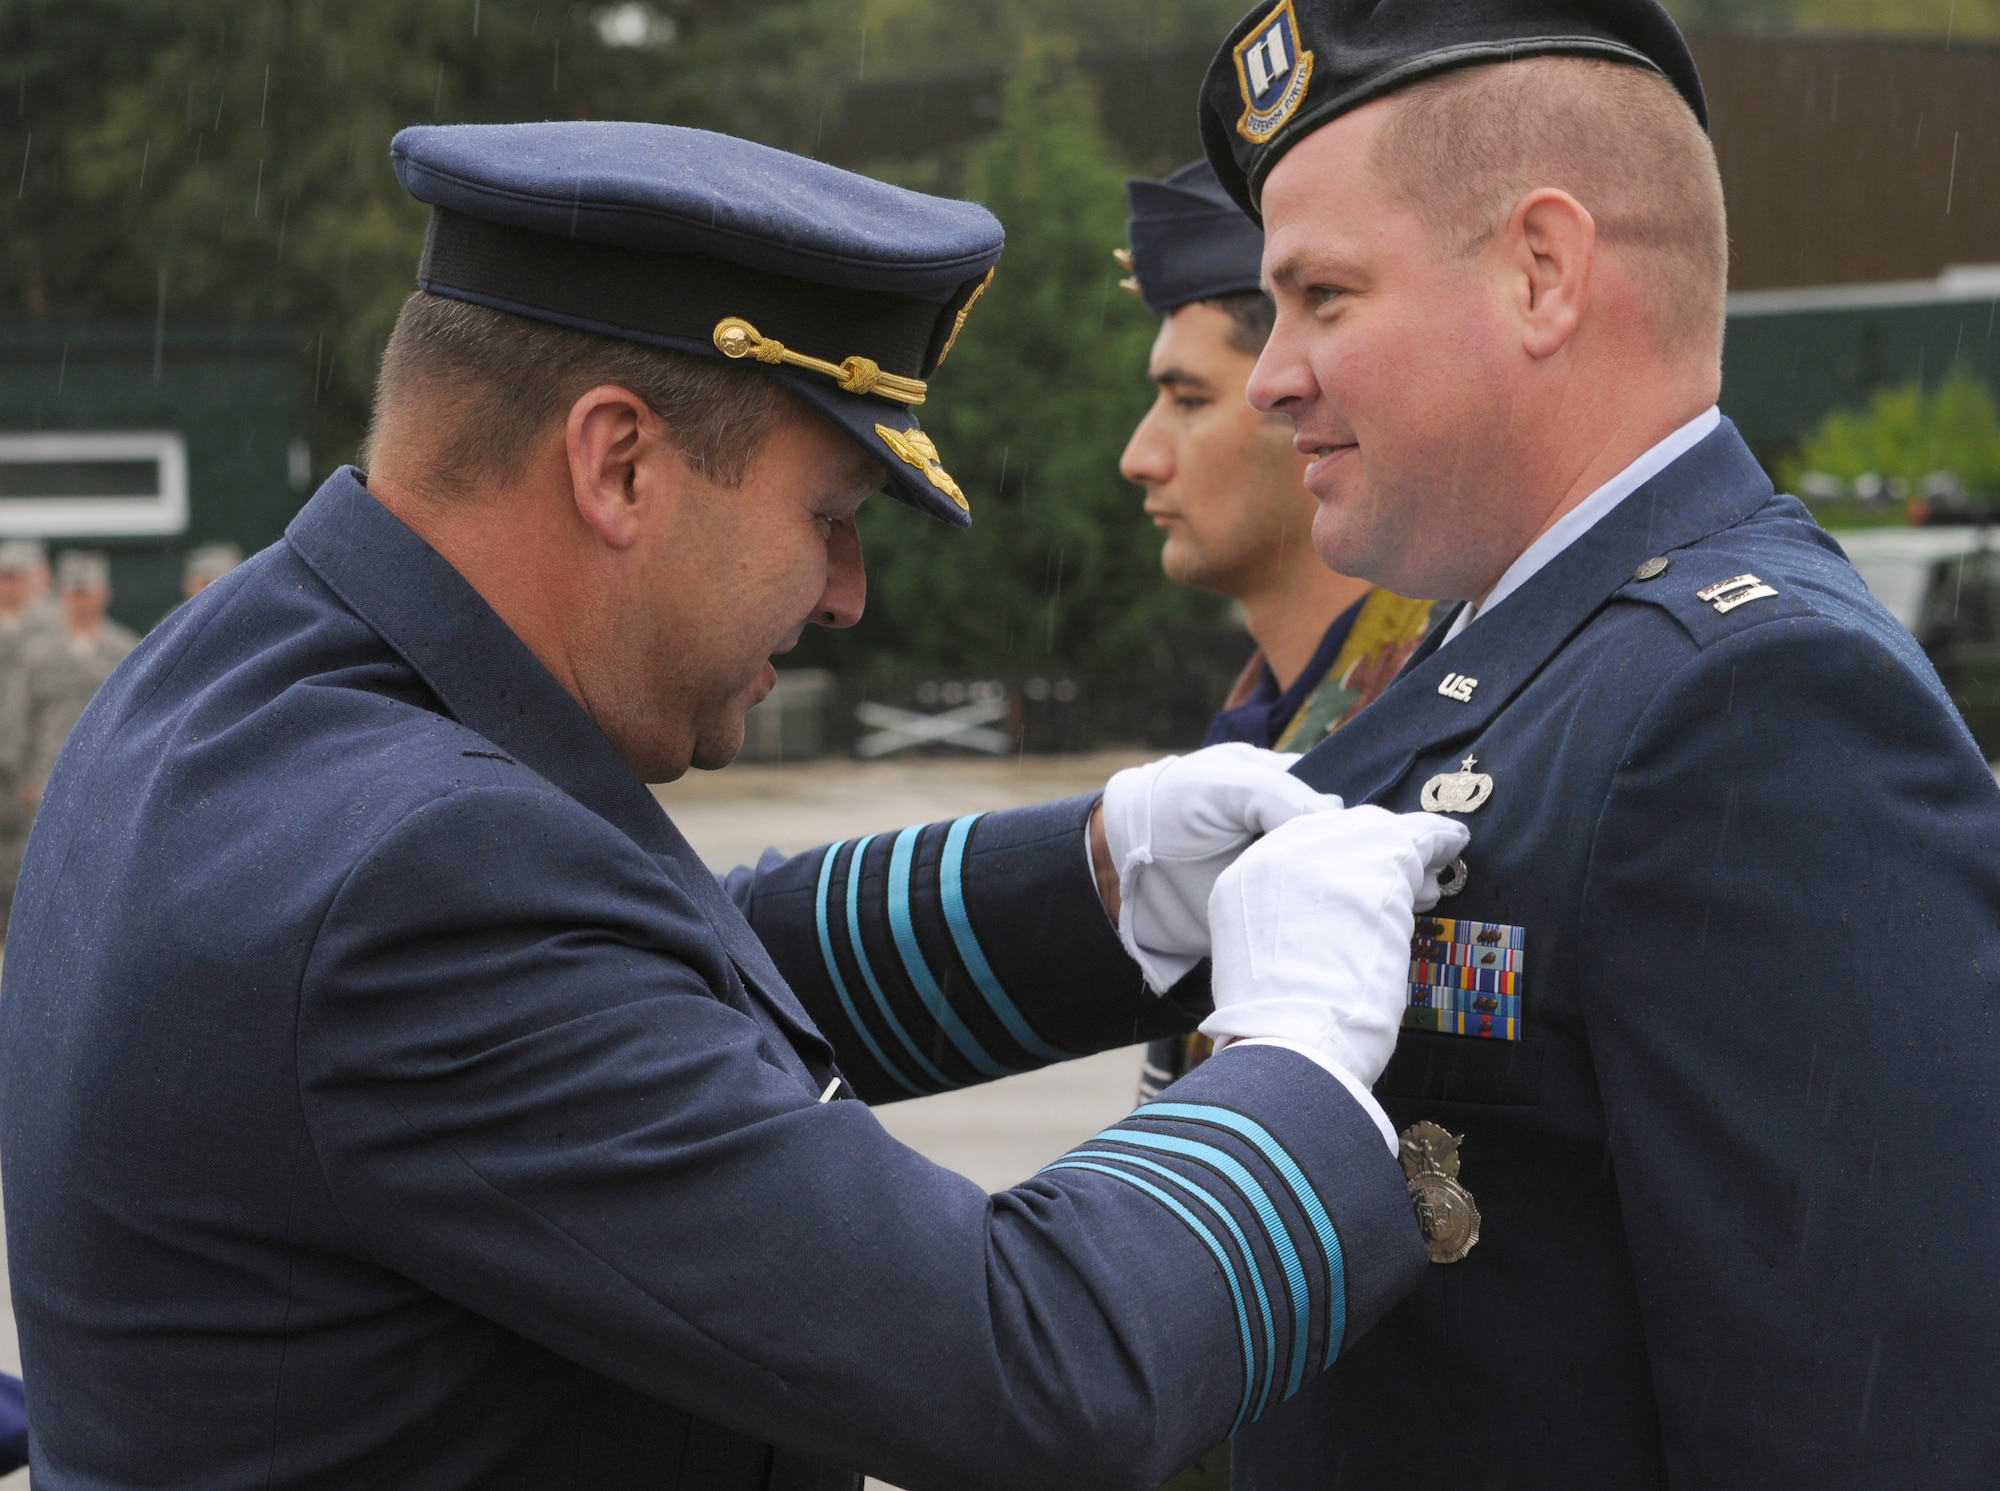 SPANGDAHLEM AIR BASE, Germany – Capt. Andrew Legault, 701st Munitions Support Squadron security forces commander, receives a Belgian Meritorious Medal from Maj. Gen Claude Van De Voorde, Belgian air force 10th Tactical Wing commander, during the 10th TW change of command ceremony Sept. 1. Captain Legault received the medal for outstanding efforts resulting in excellent ratings during the most recent weapons inspection at Kleine Brogel Air Base, Belgium. (U.S. Air Force photo/Senior Airman Benjamin Wilson)